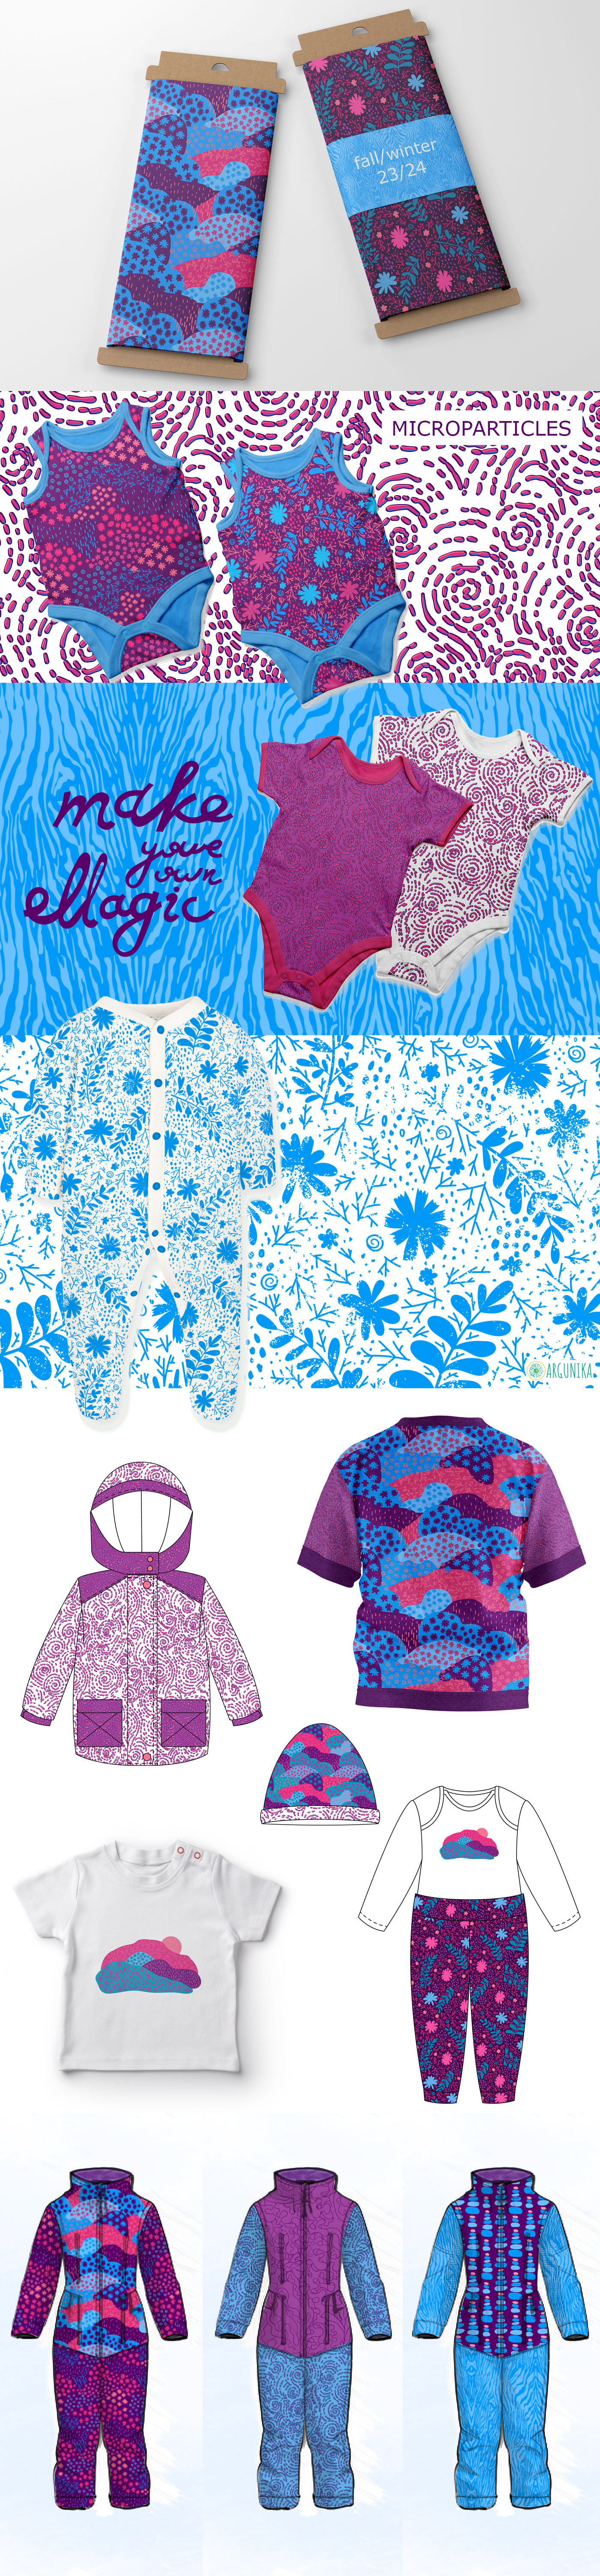 Fashion  garden kids apparel lettering particles Stationery surface pattern design textile vector winter flowers